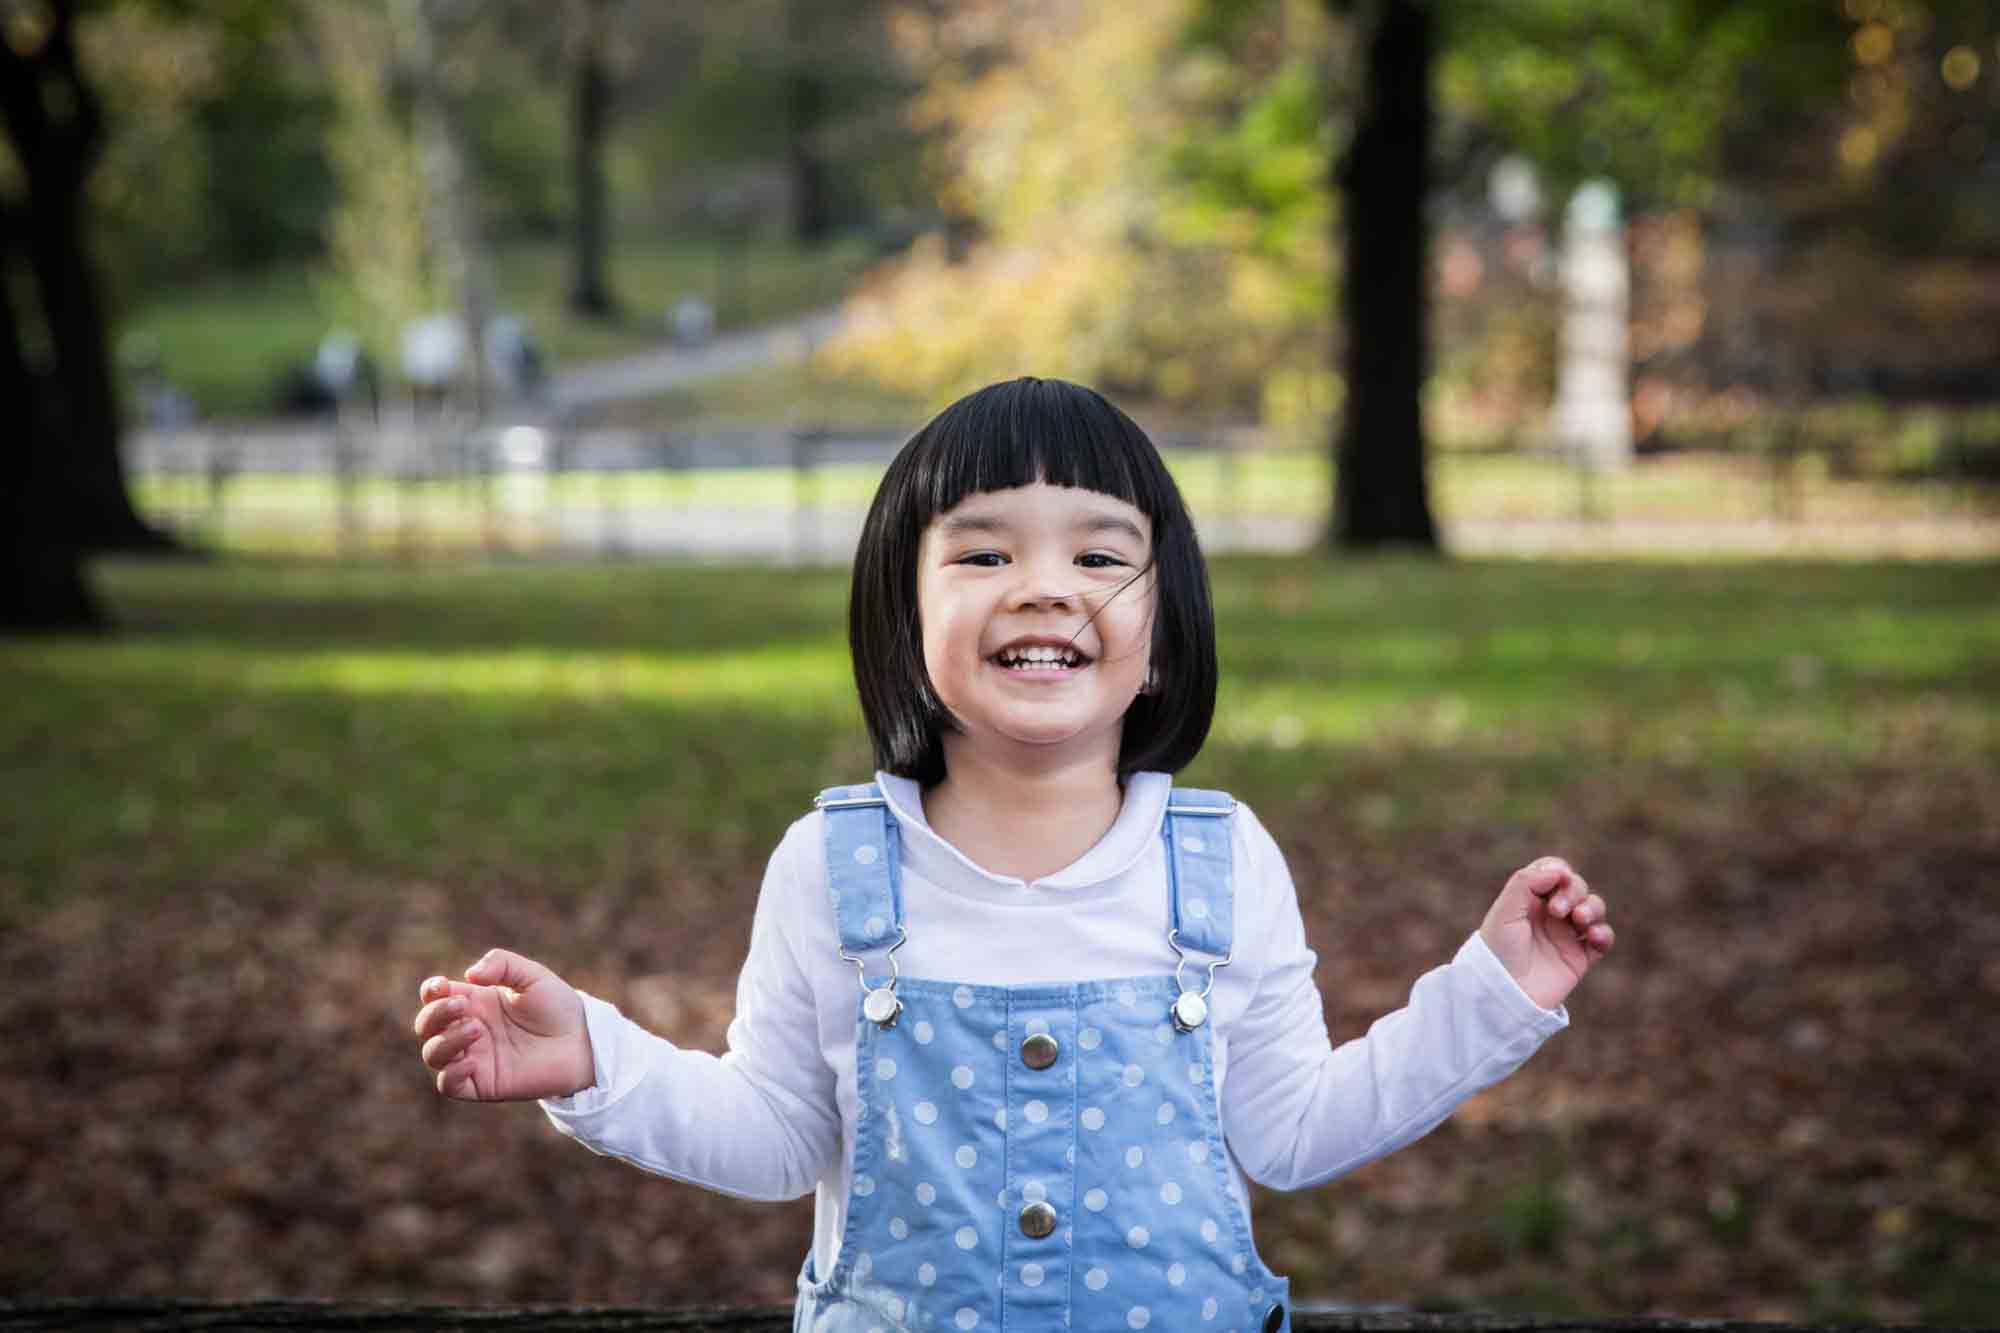 Smiling little girl wearing blue overalls and white shirt for an article on Central Park winter portrait tips